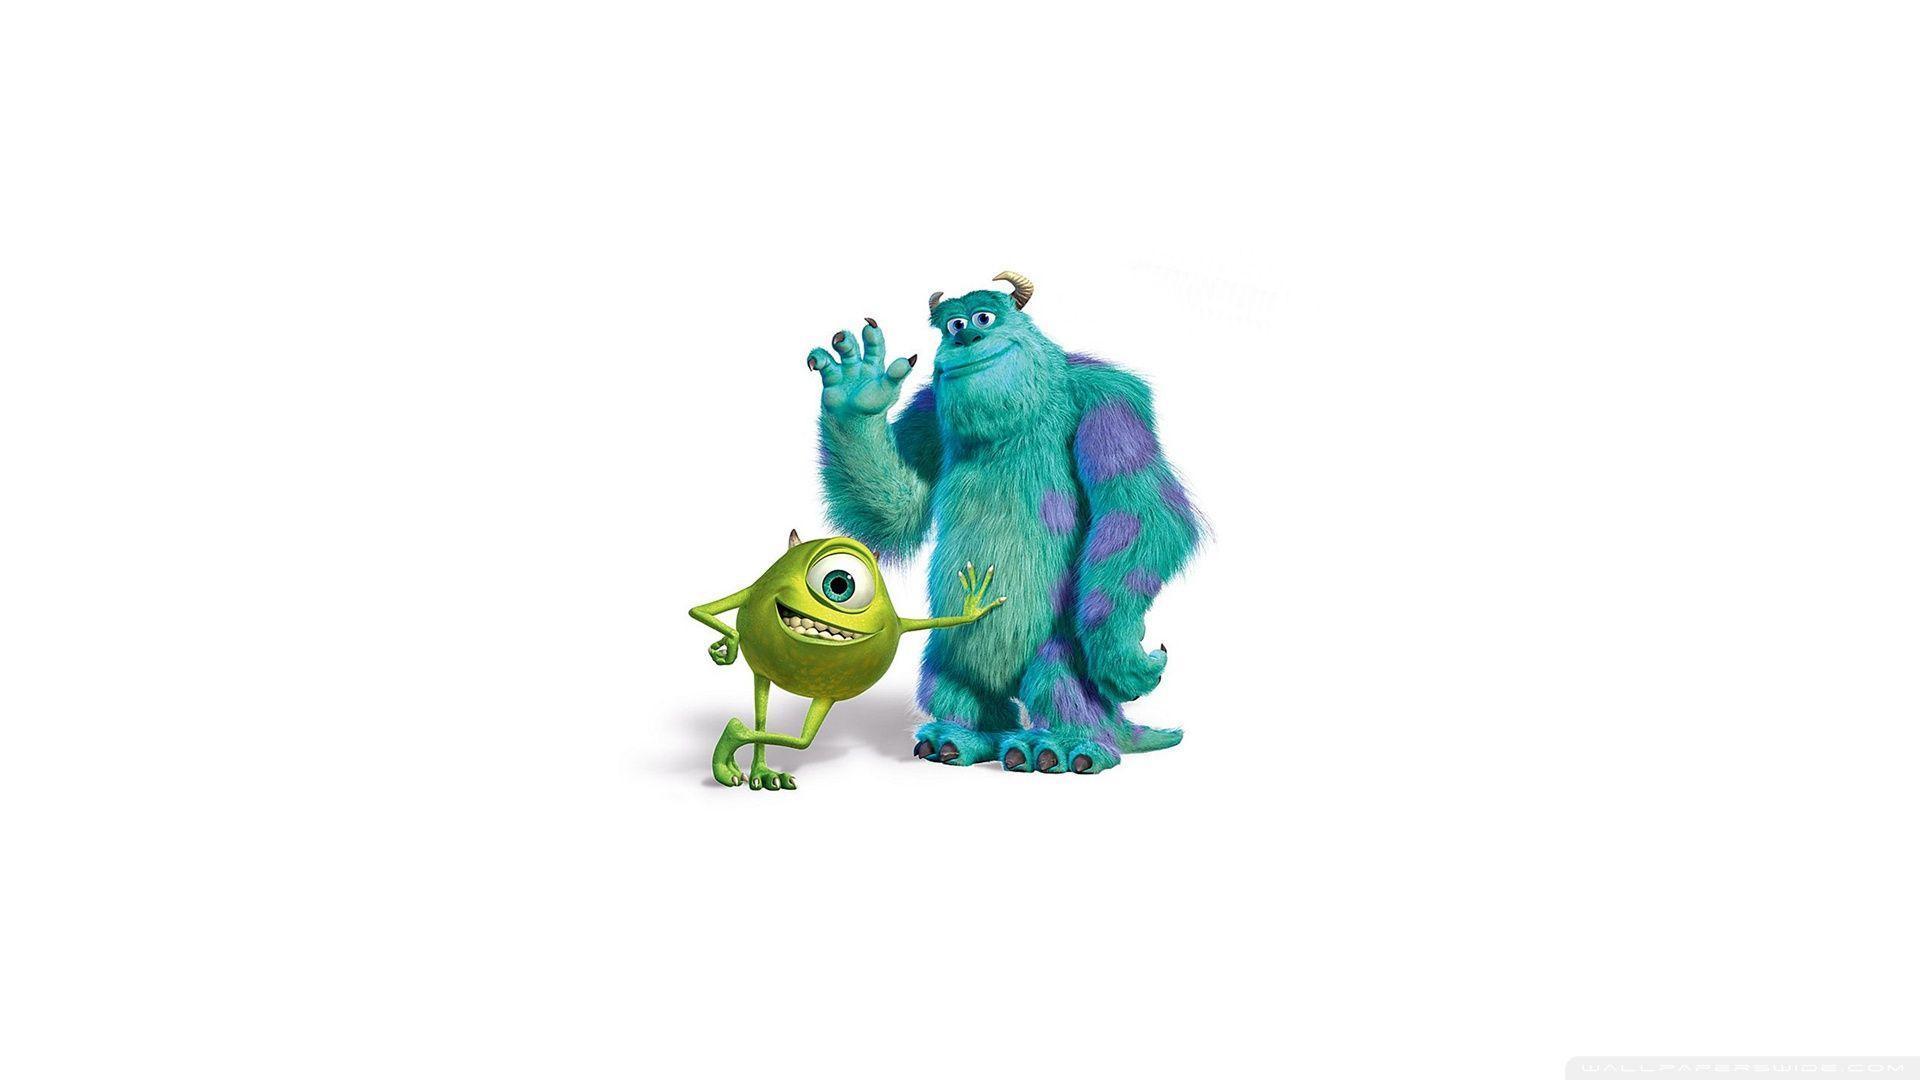 Monsters Inc Sulley And Mike ❤ 4K HD Desktop Wallpaper for 4K Ultra